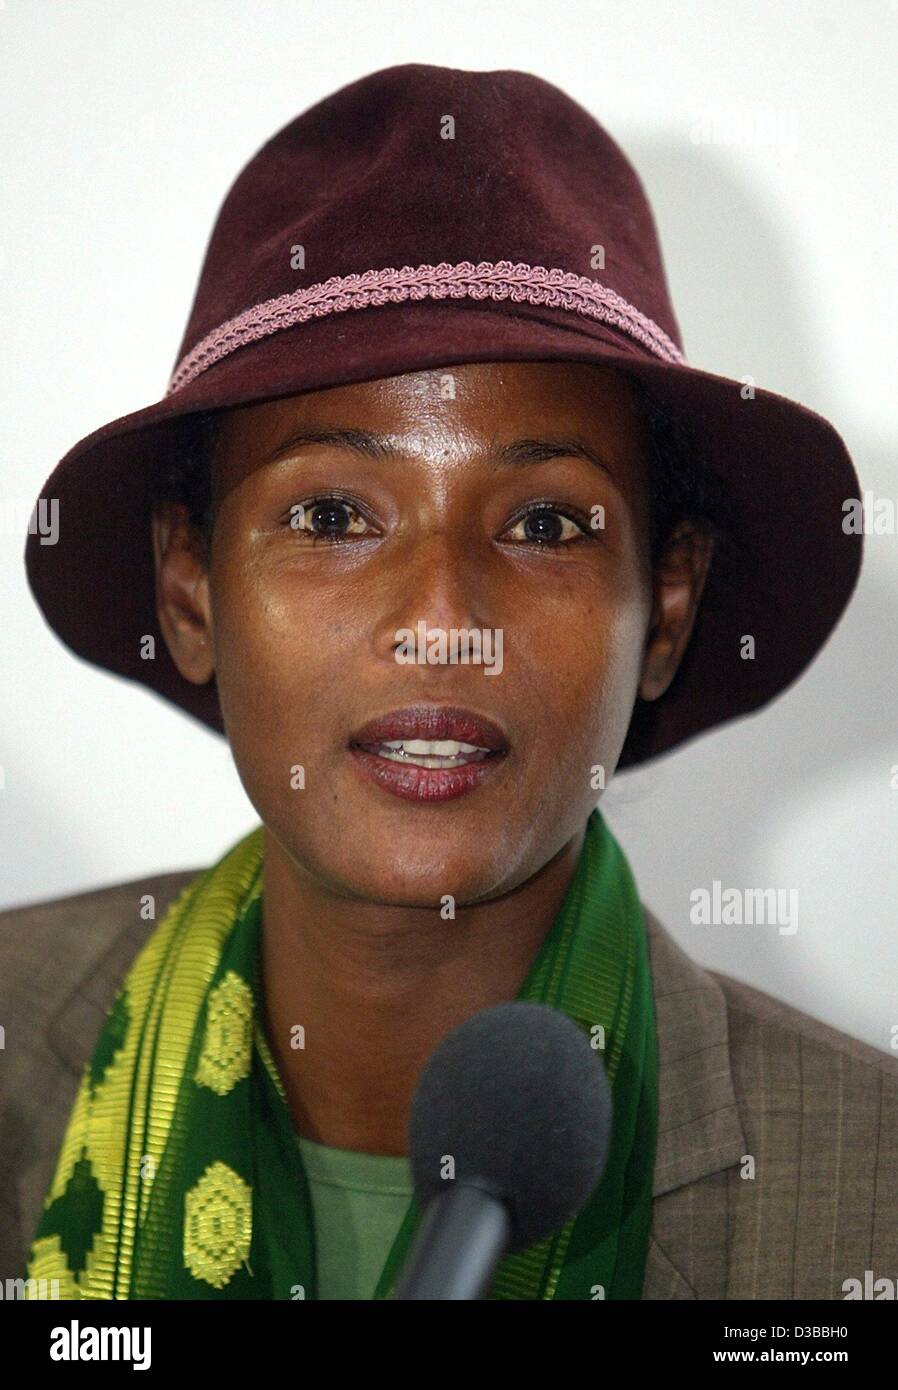 (dpa) - The former top model Waris Dirie from Somalia, pictured at a press conference in Munich, 6 November 2002. In the evening Waris Dirie will be awarded the International Book Prize Corine 2002 for her autobiography 'Desert Flower: The Extraordinary Journey of a Desert Nomad'. This year's Prize  Stock Photo